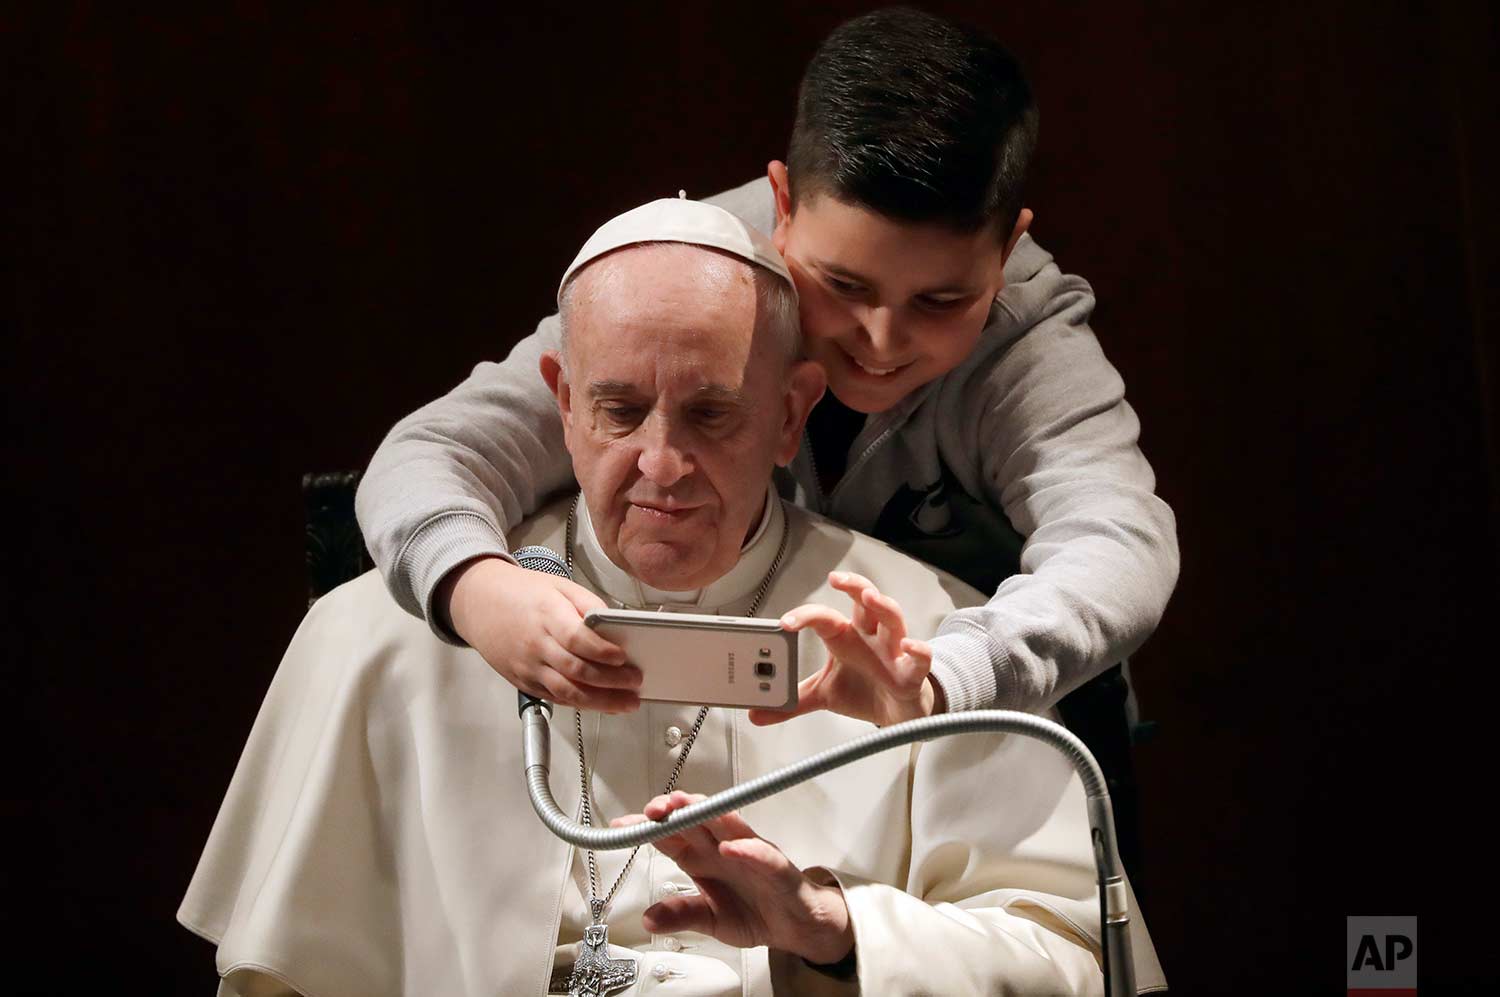  In this Sunday, Feb. 19, 2017 photo, a boy takes a selfie with Pope Francis, during a visit to the parish of Santa Maria Josefa del Cuore di Gesu', in Rome. (AP Photo/Alessandra Tarantino) 